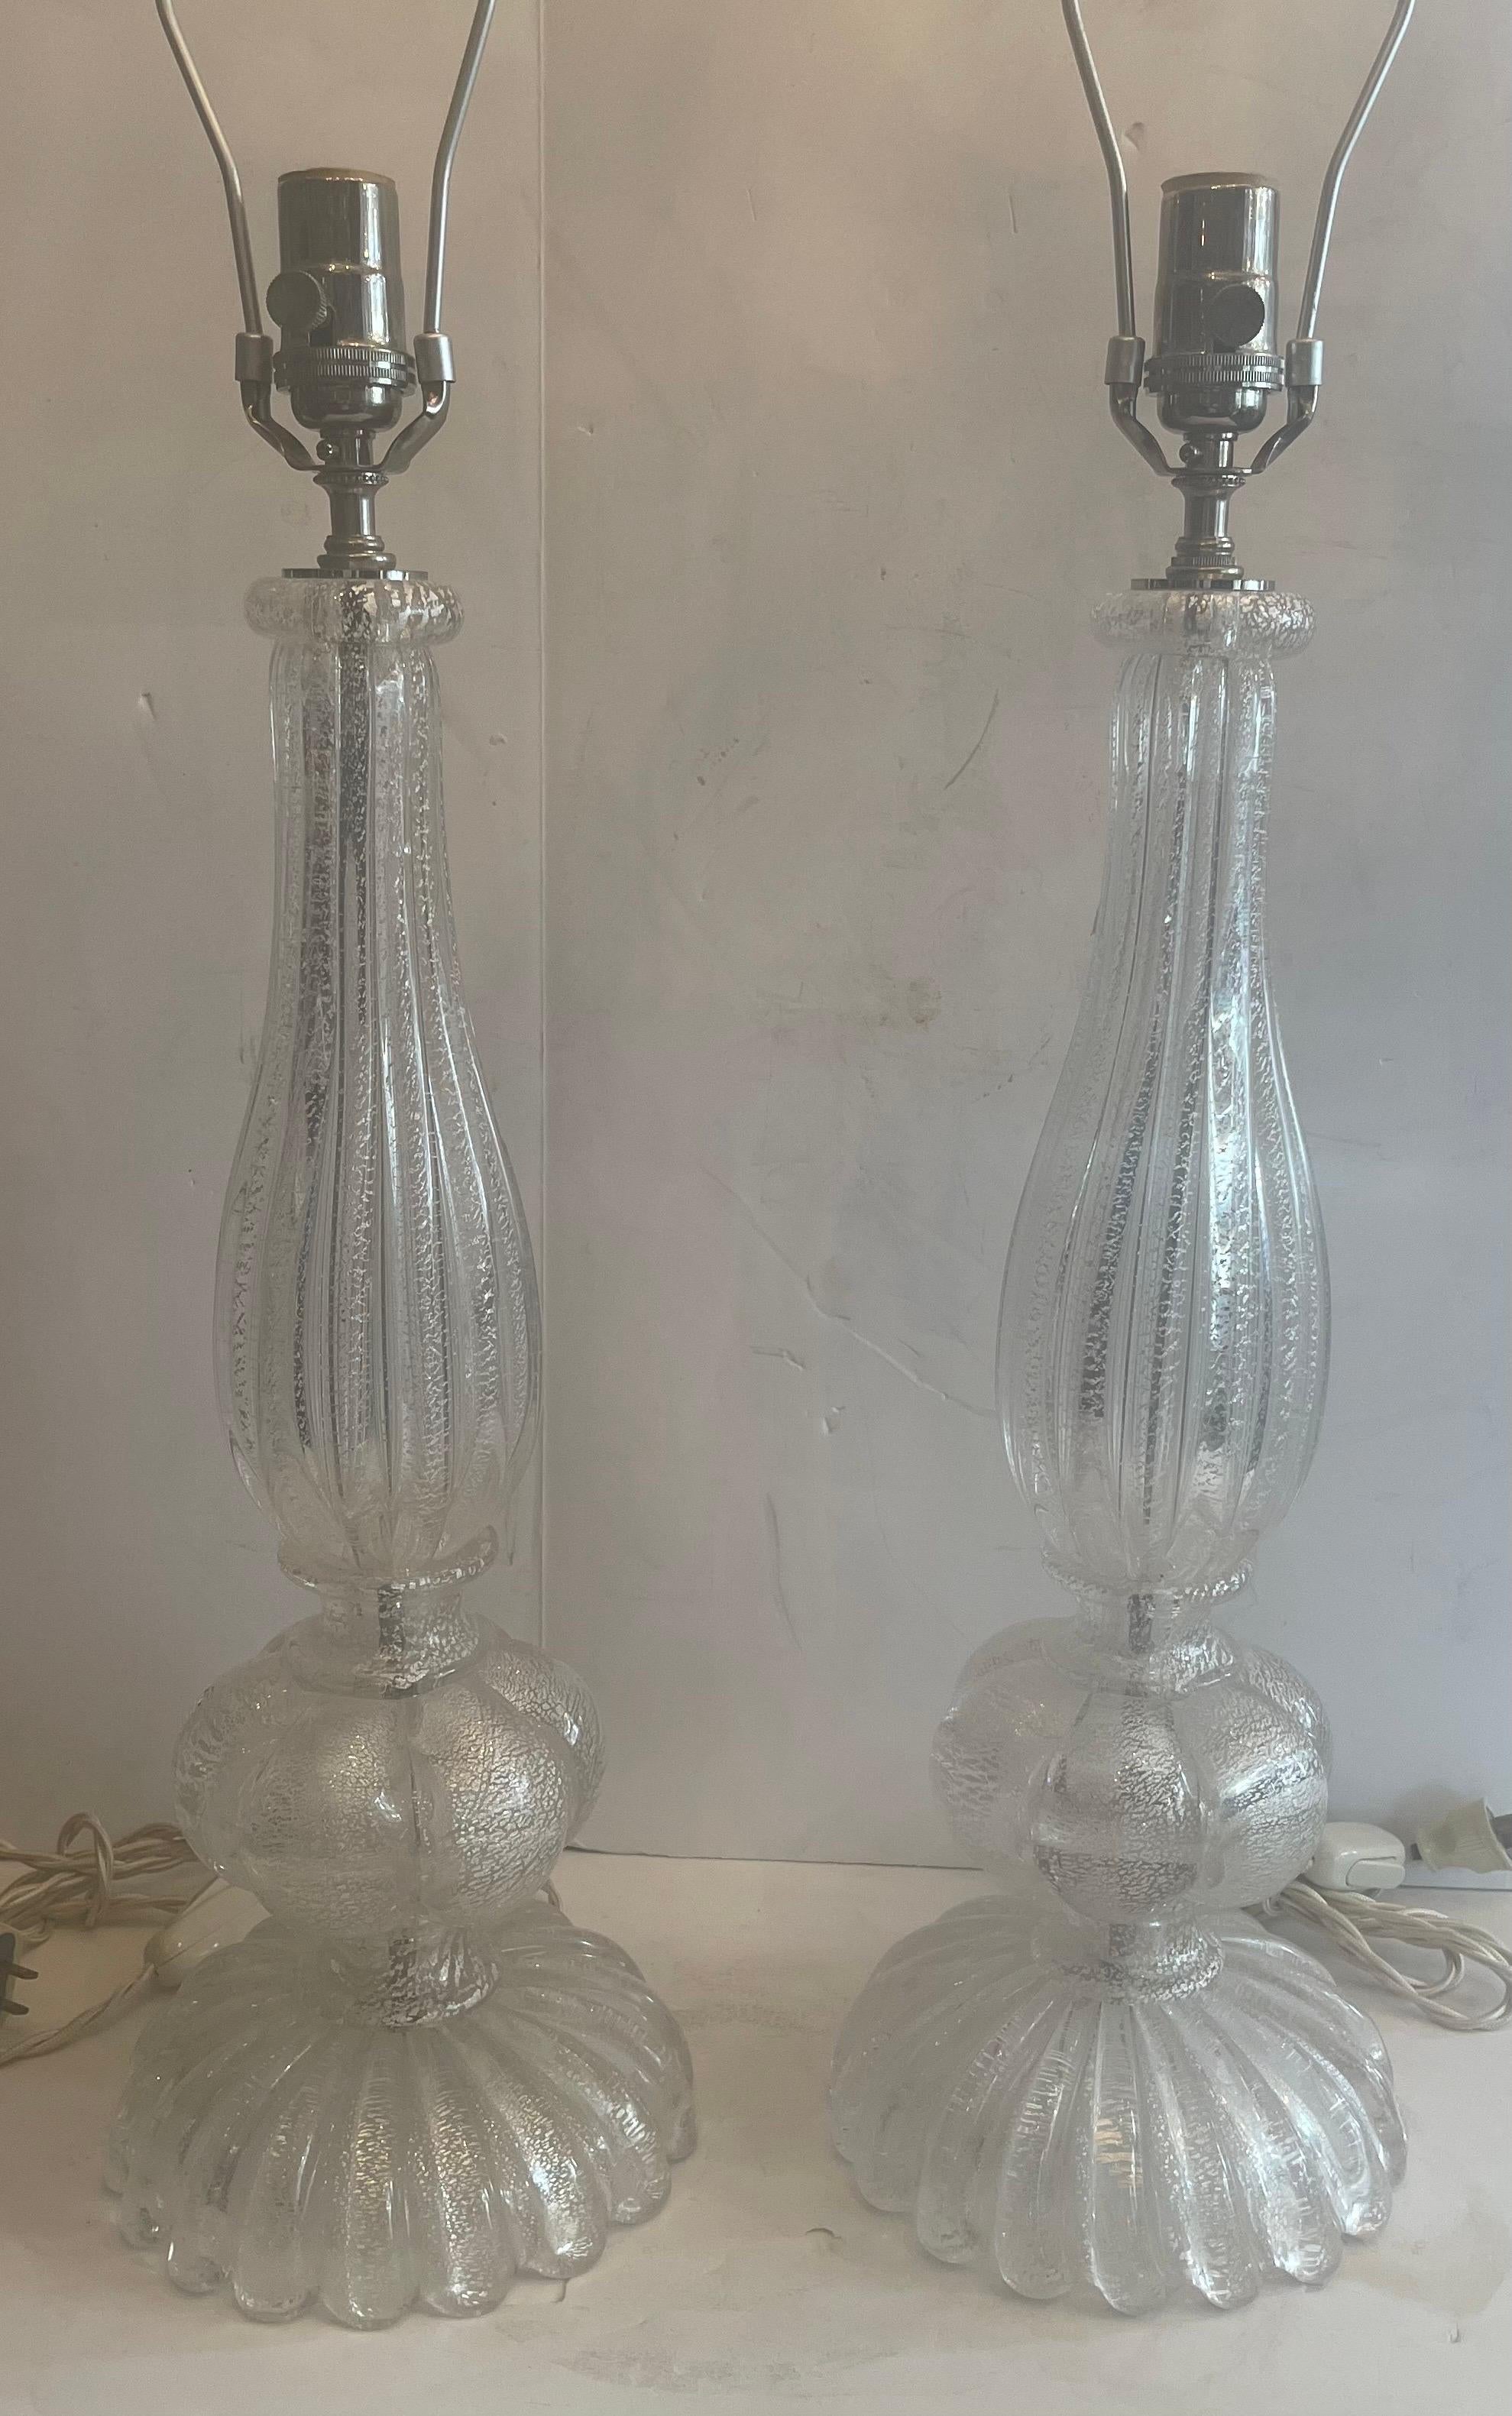 A wonderful pair of Mid-Century Modern Italian Murano Seguso style Venetian clear fluted with silver flake glass lamps in the Art Deco style with new polished nickel fittings and wiring.
Purchased from Lorin Marsh.
